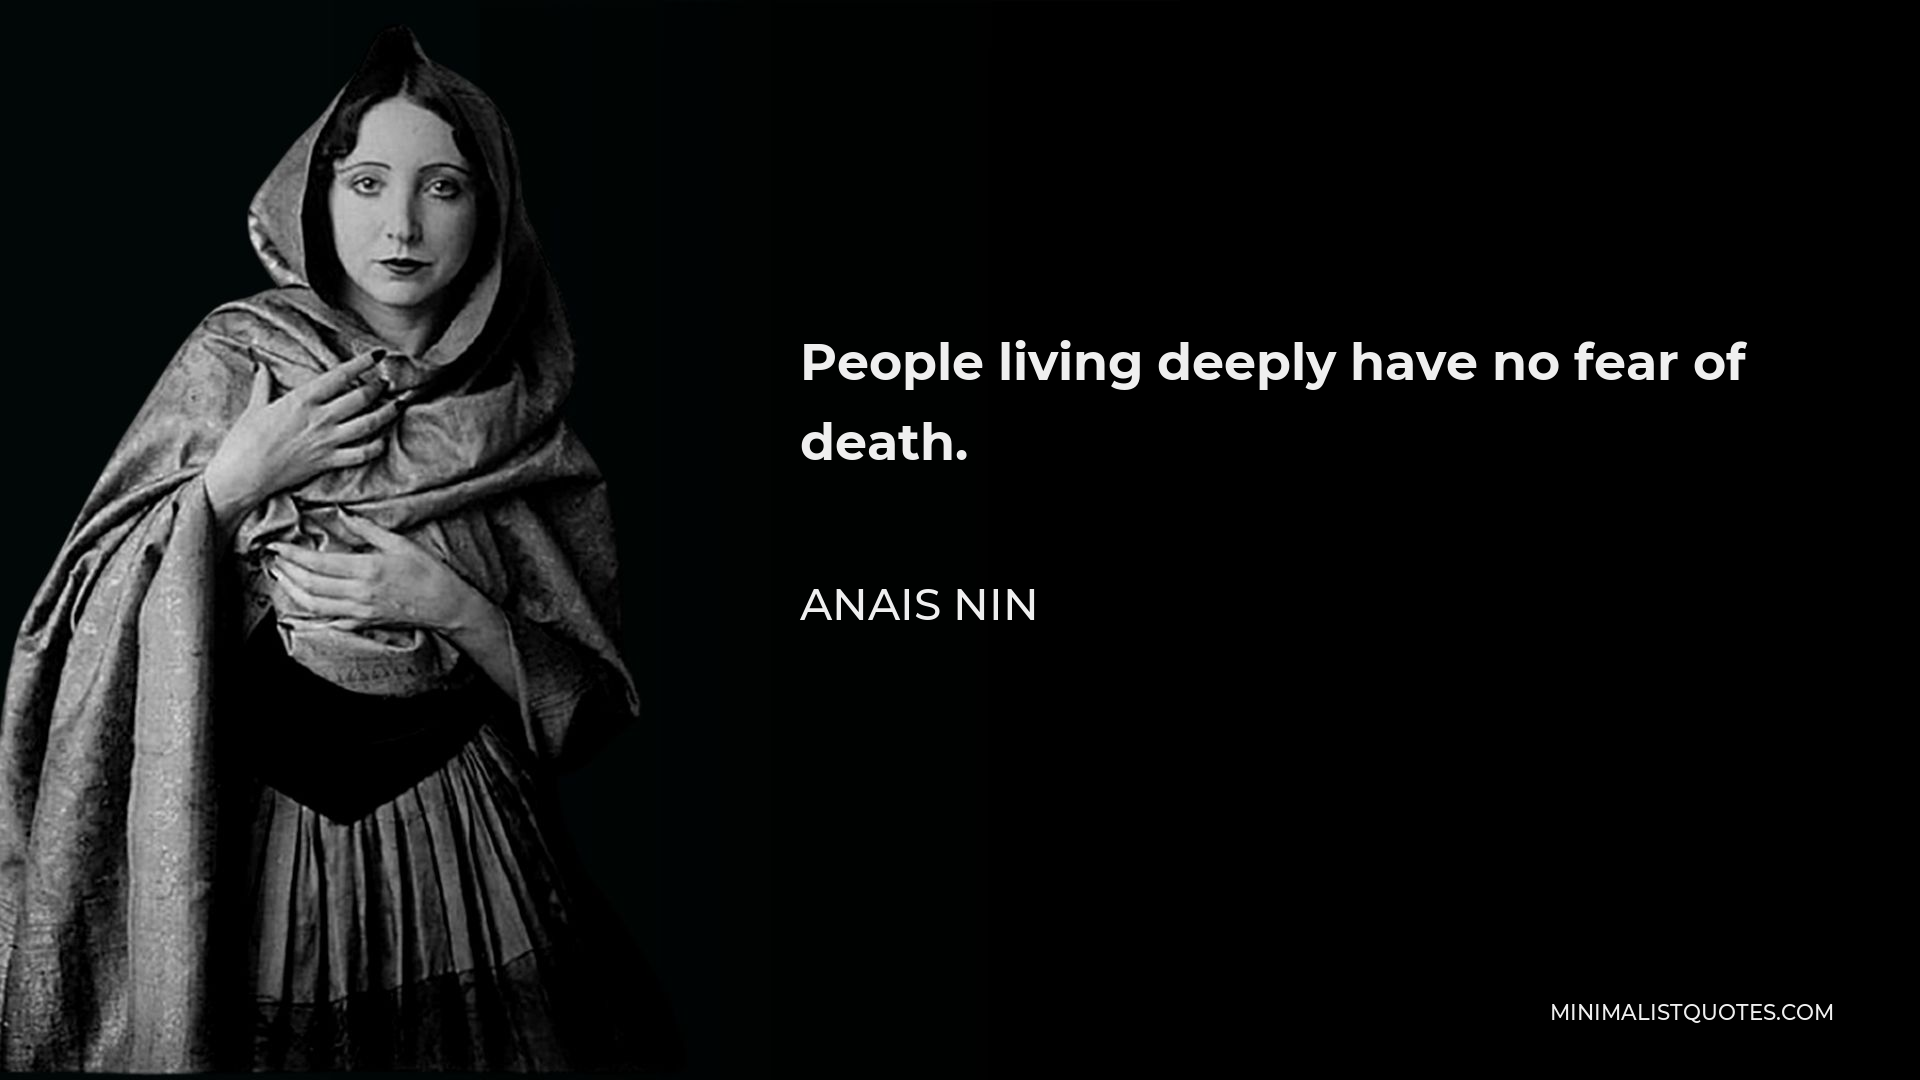 Anais Nin Quote - People living deeply have no fear of death.